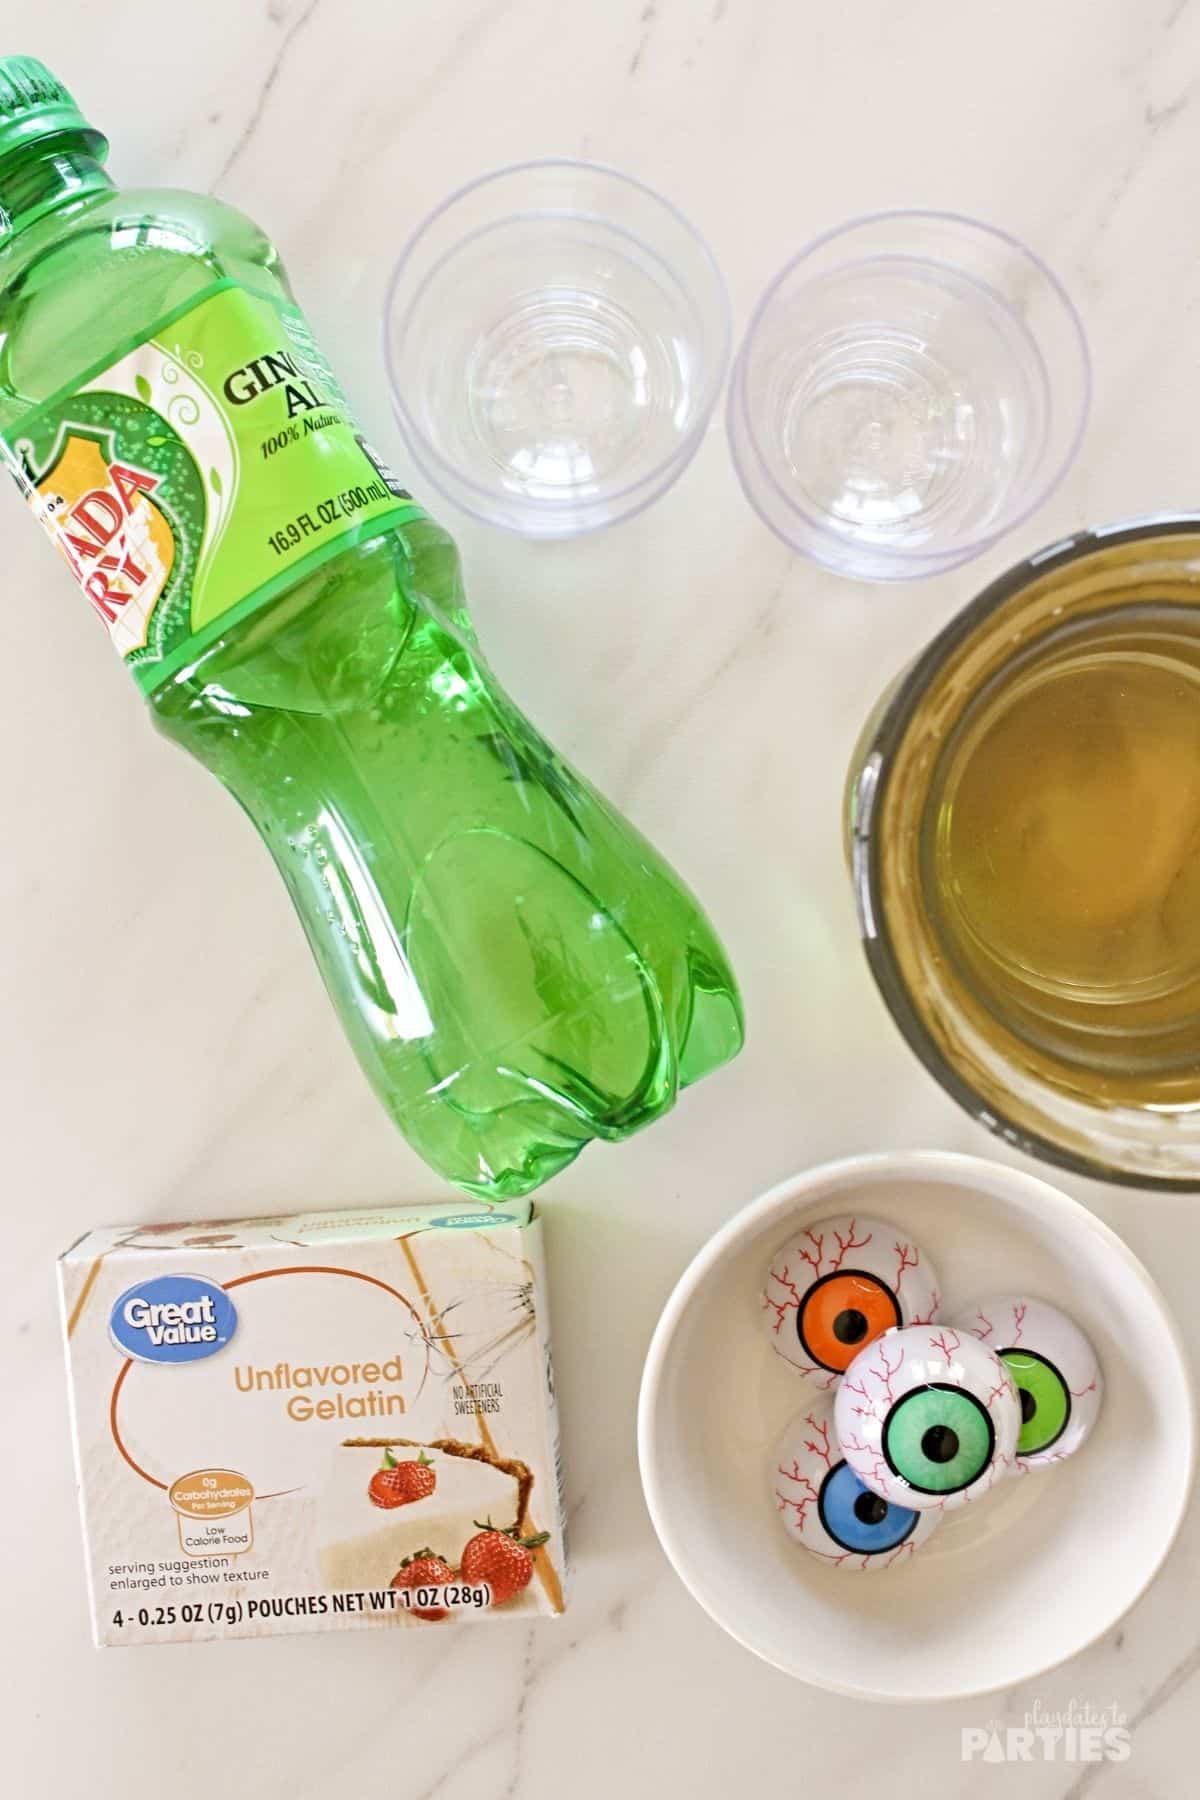 Ingredients on a table including ginger ale, unflavored gelatin, gummy eyeballs, and white grape juice.